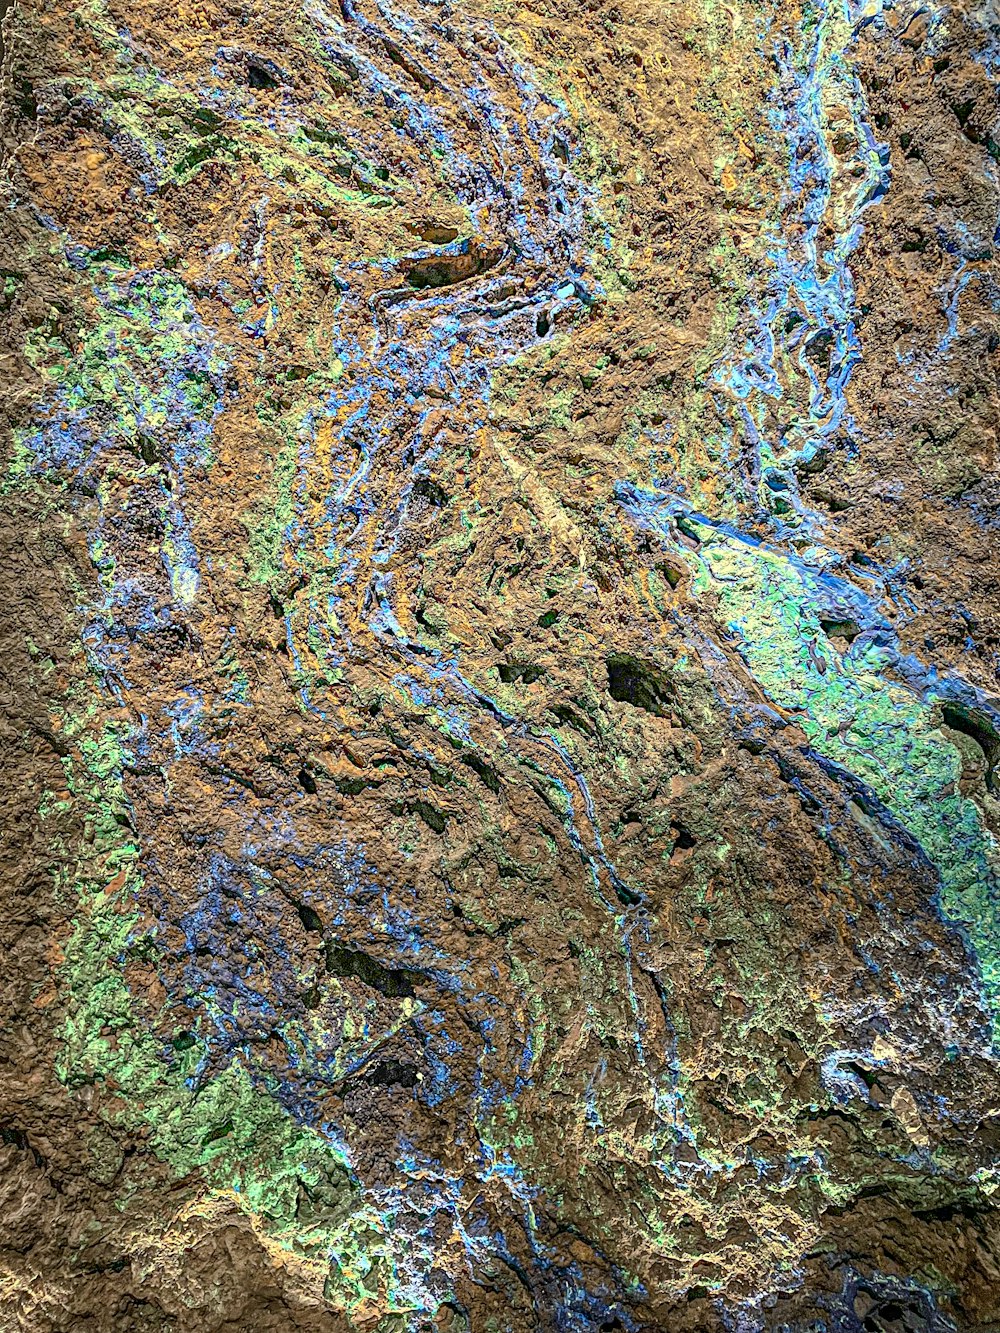 a close up of a rock with blue and green paint